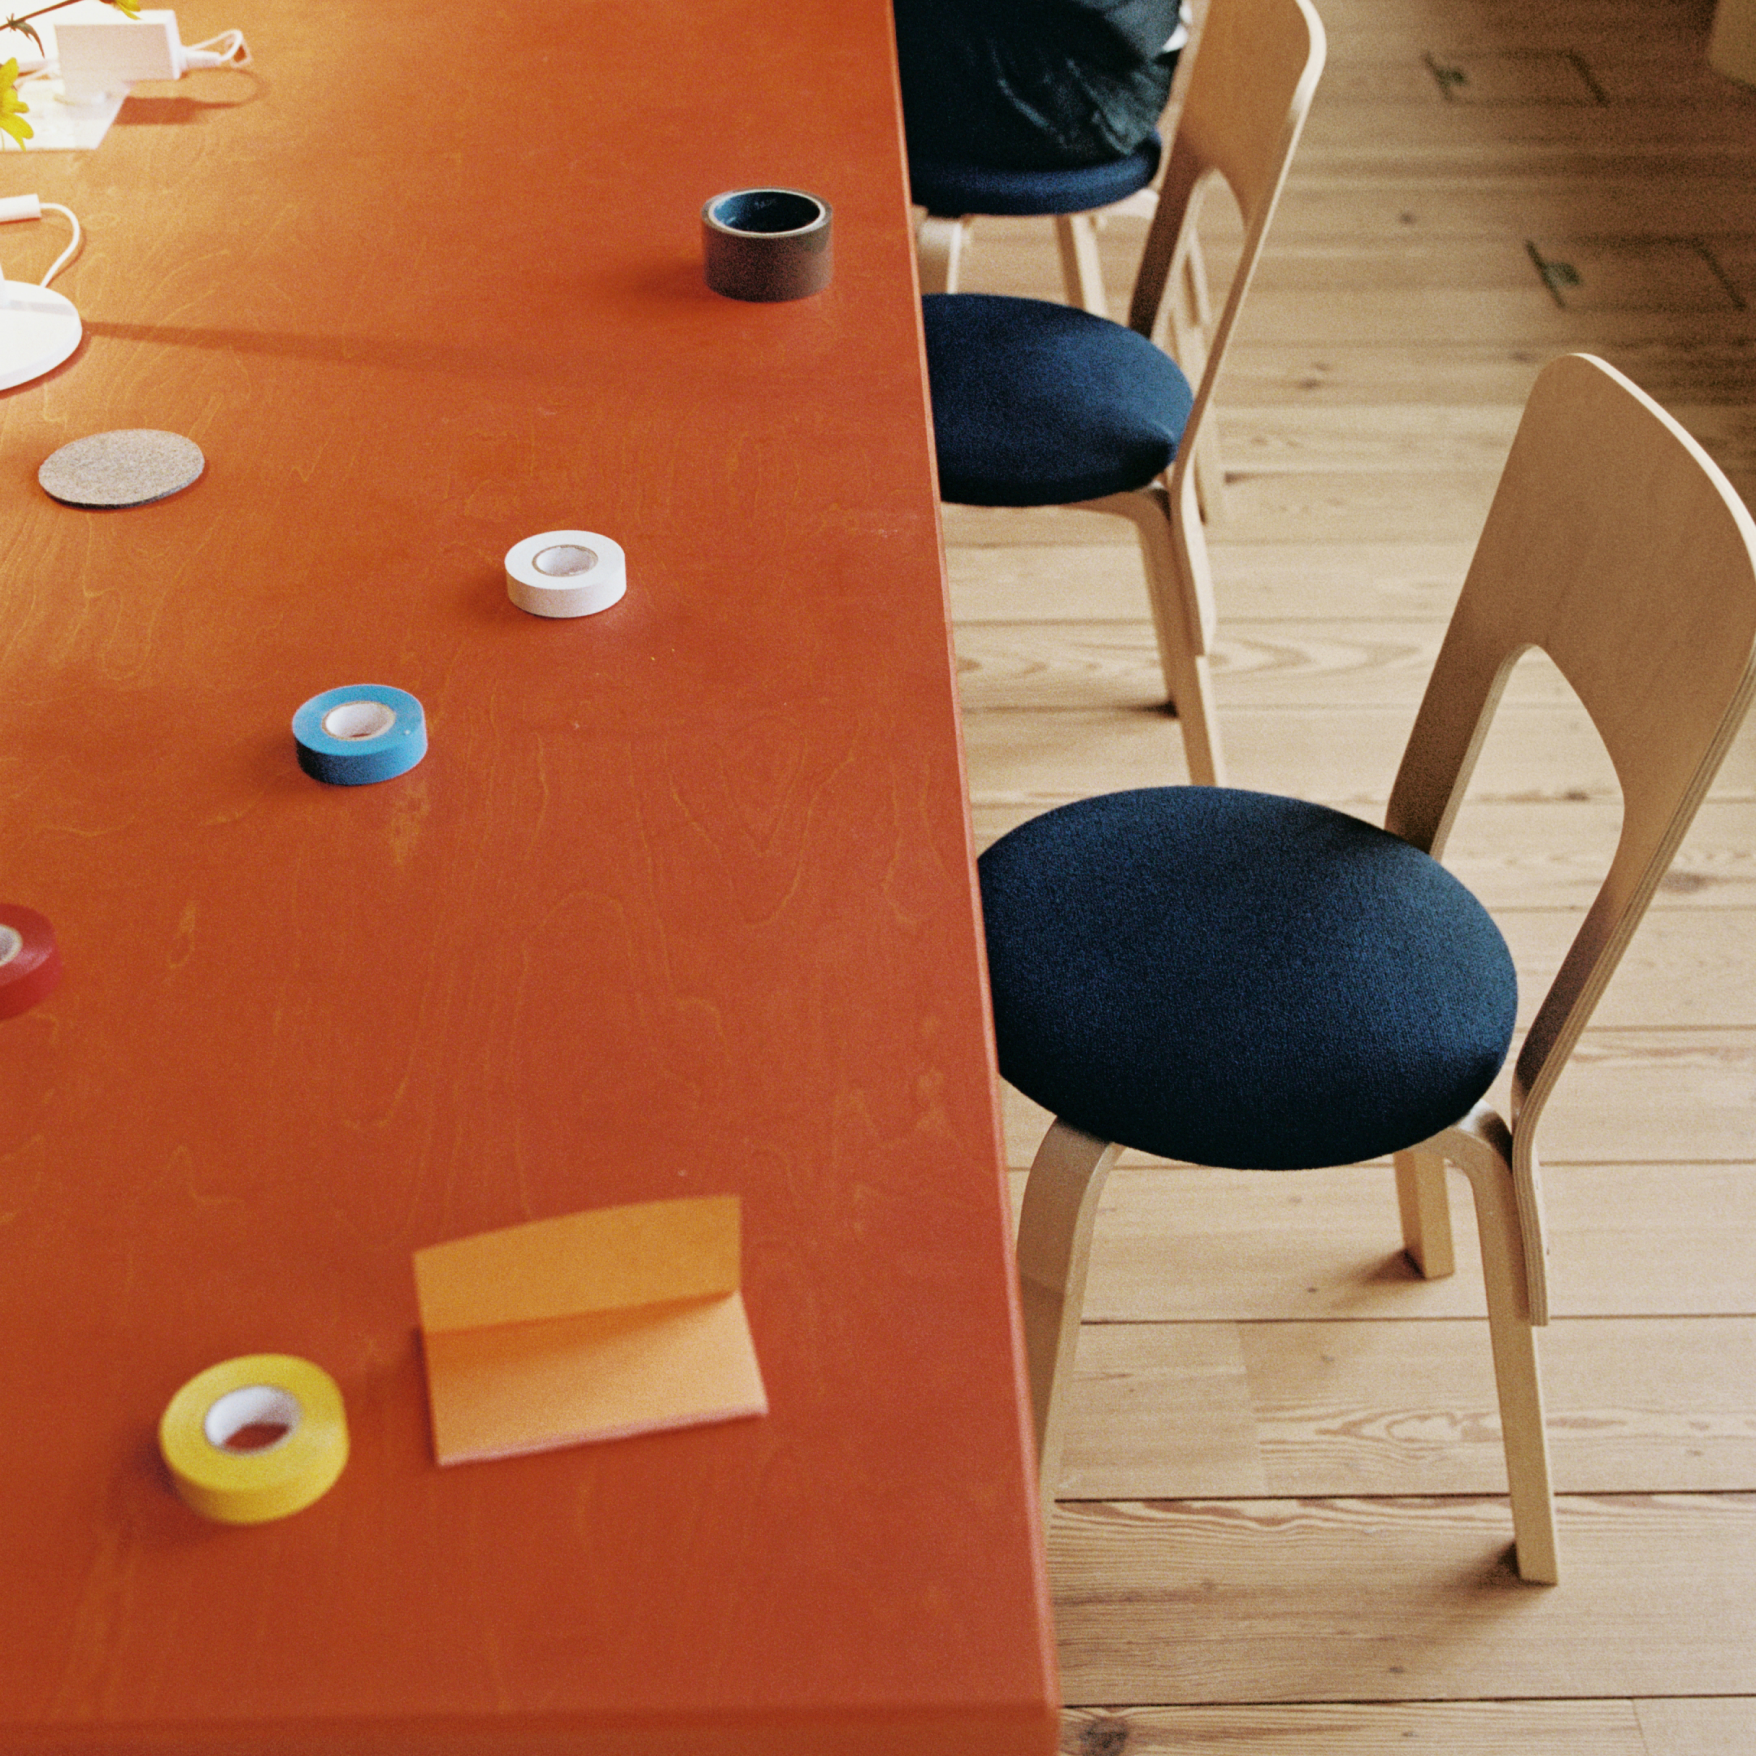 An orange table with stationery accessories and chairs